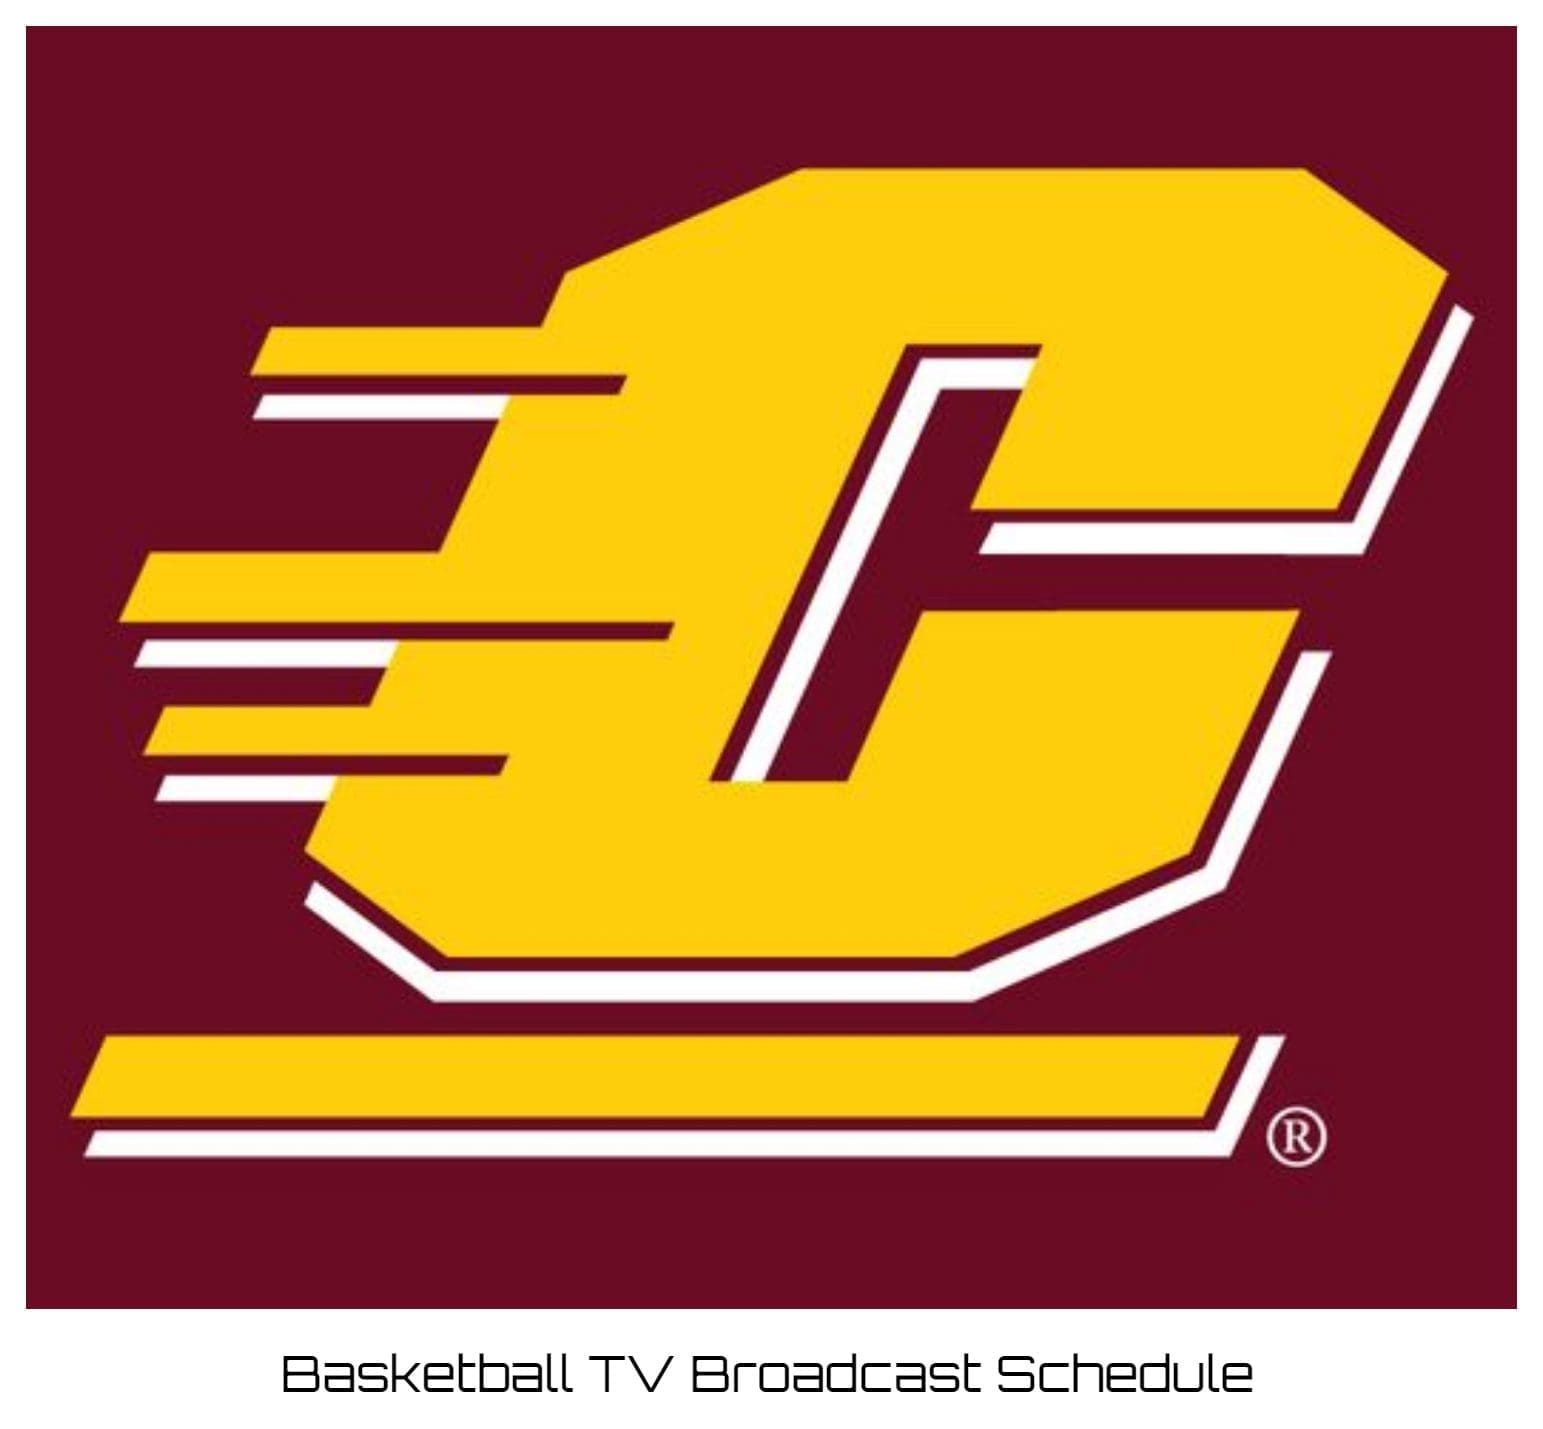 Central Michigan Chippewas Basketball TV Broadcast Schedule